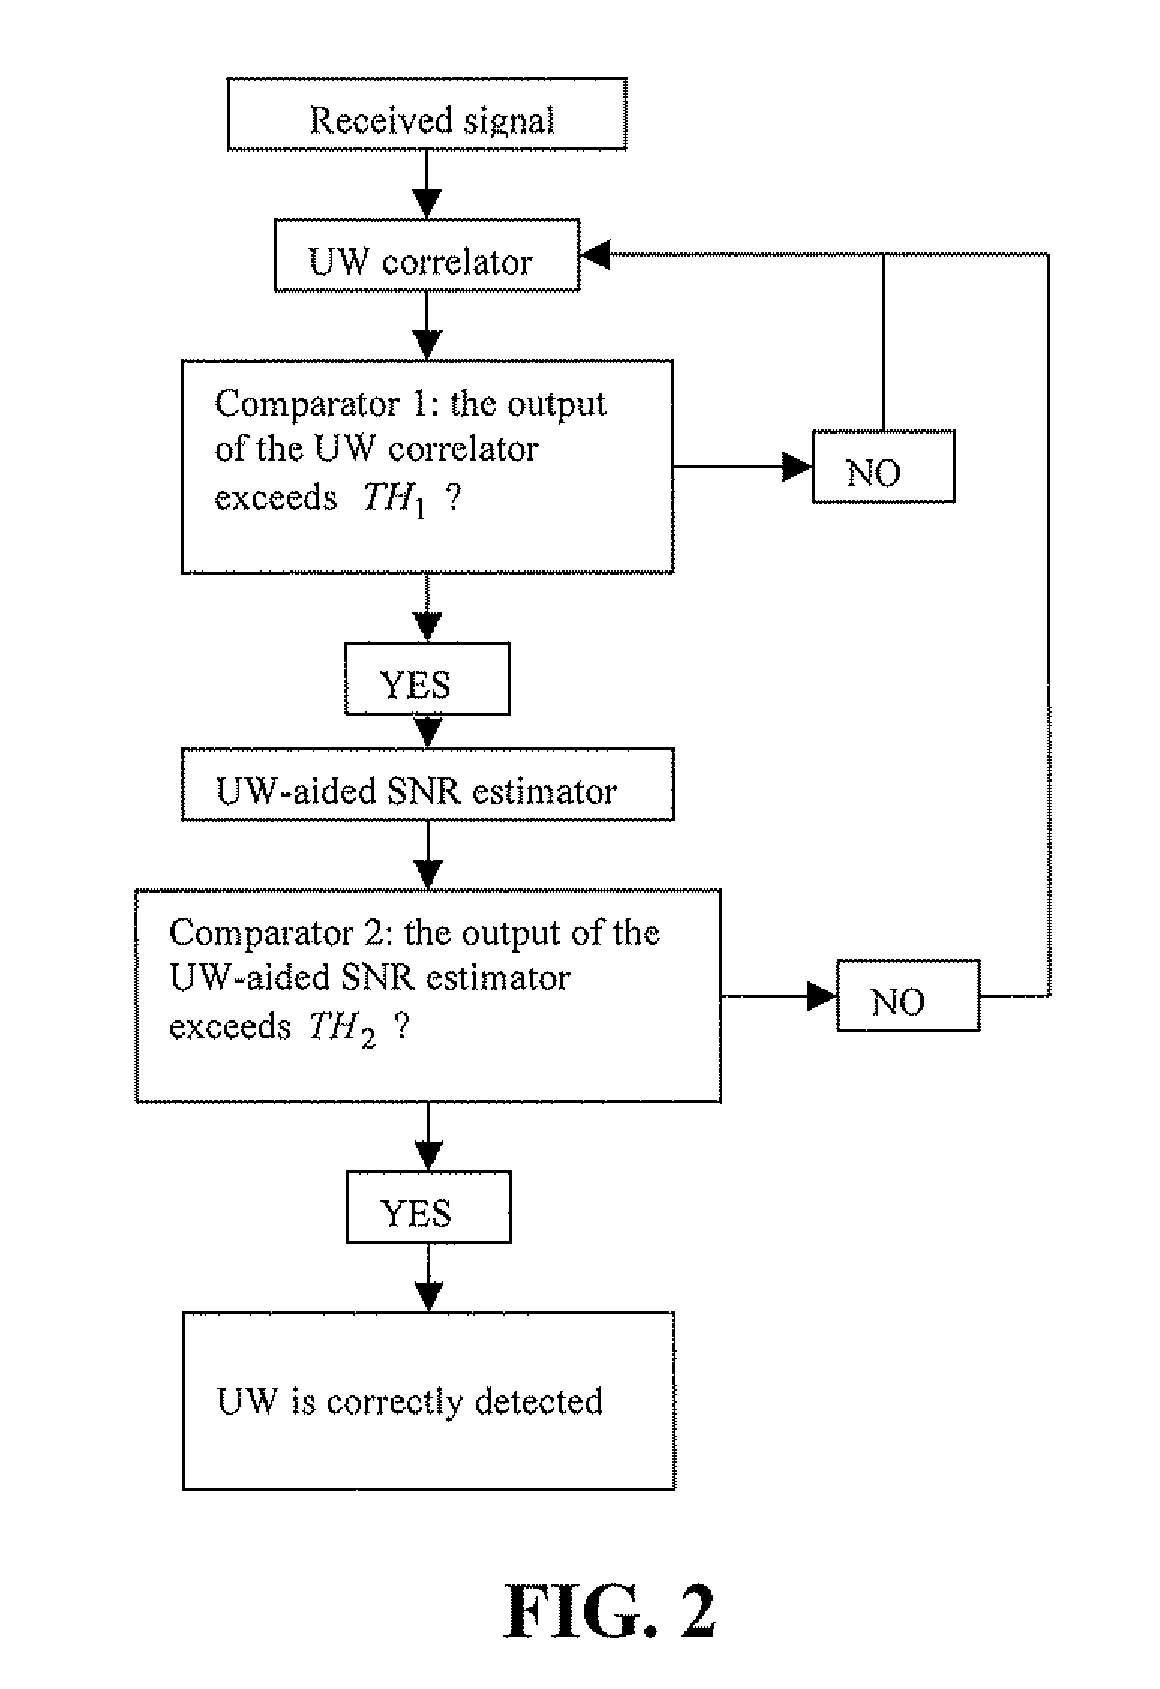 Method of detecting a frame synchronization pattern or unique word in a received digital signal